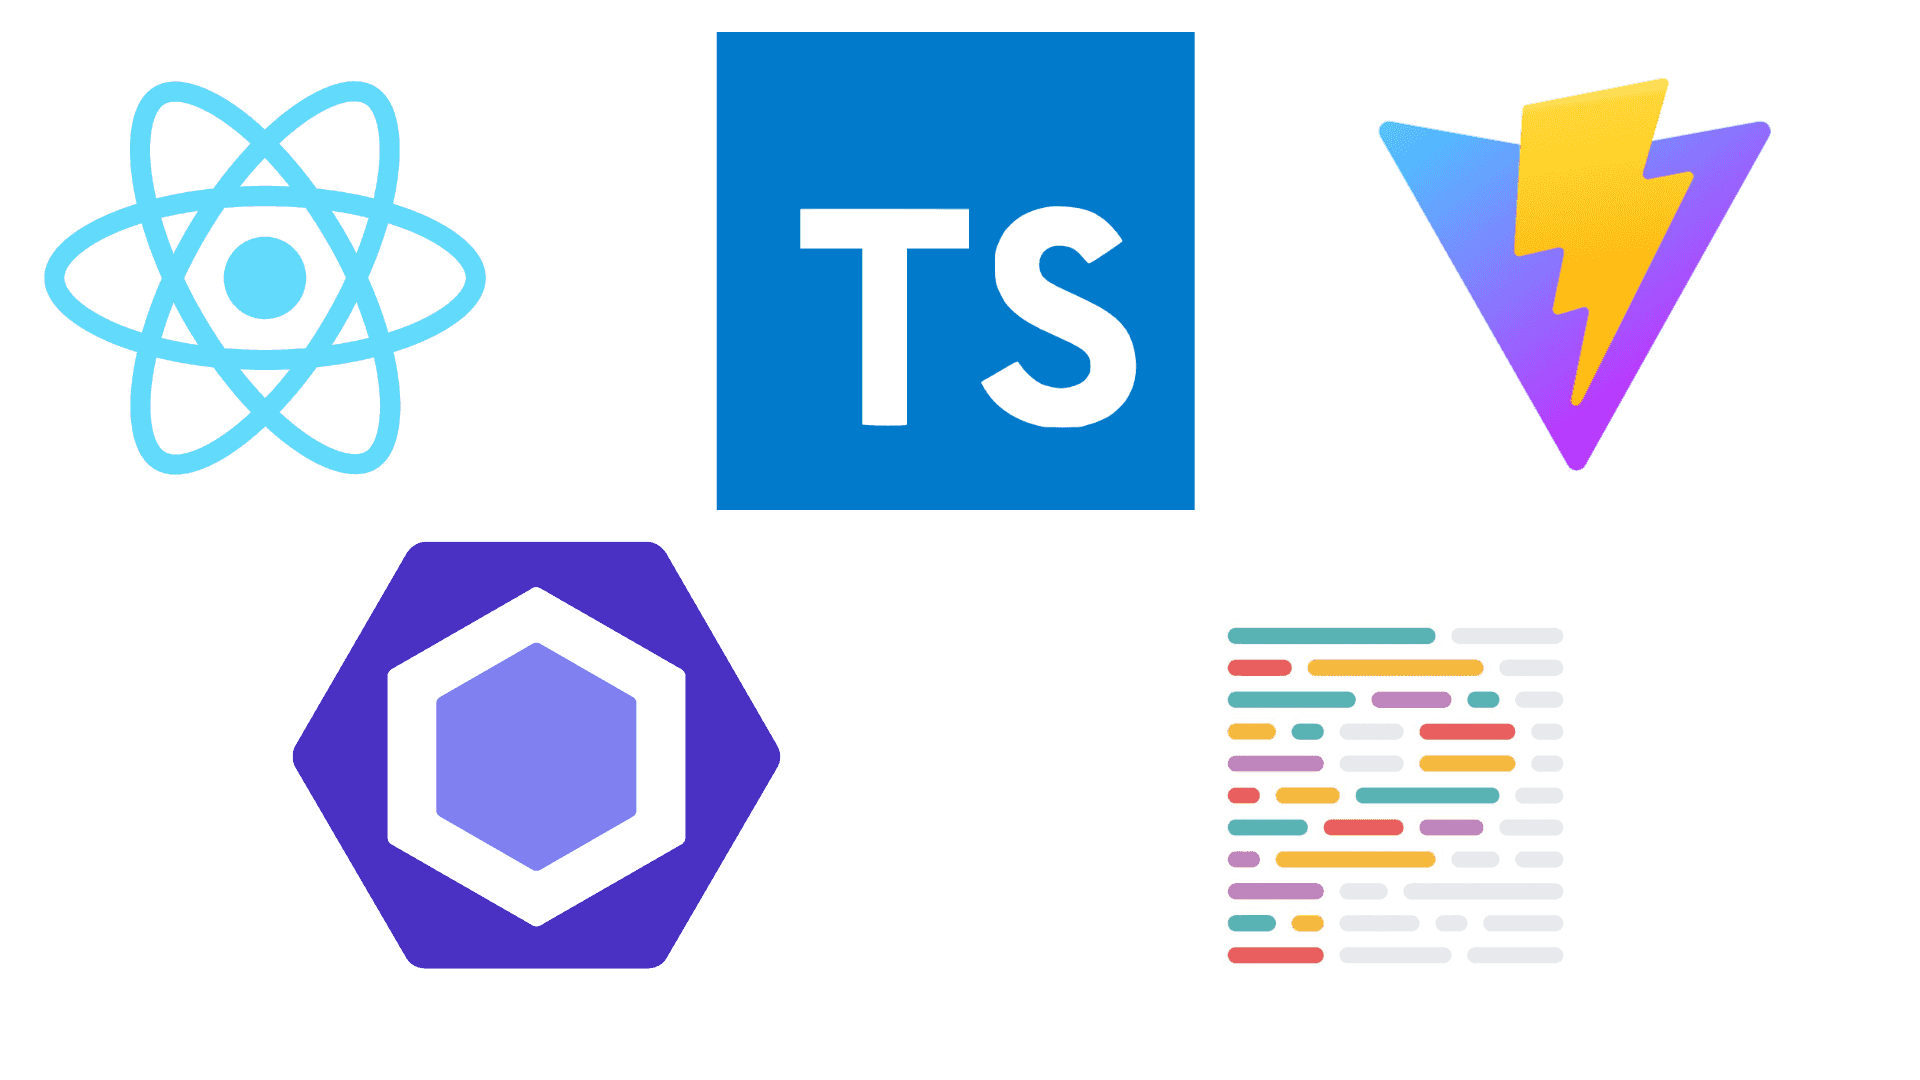 In this blog entry I will show you how you can setup a brand new react project using typescript and vite.